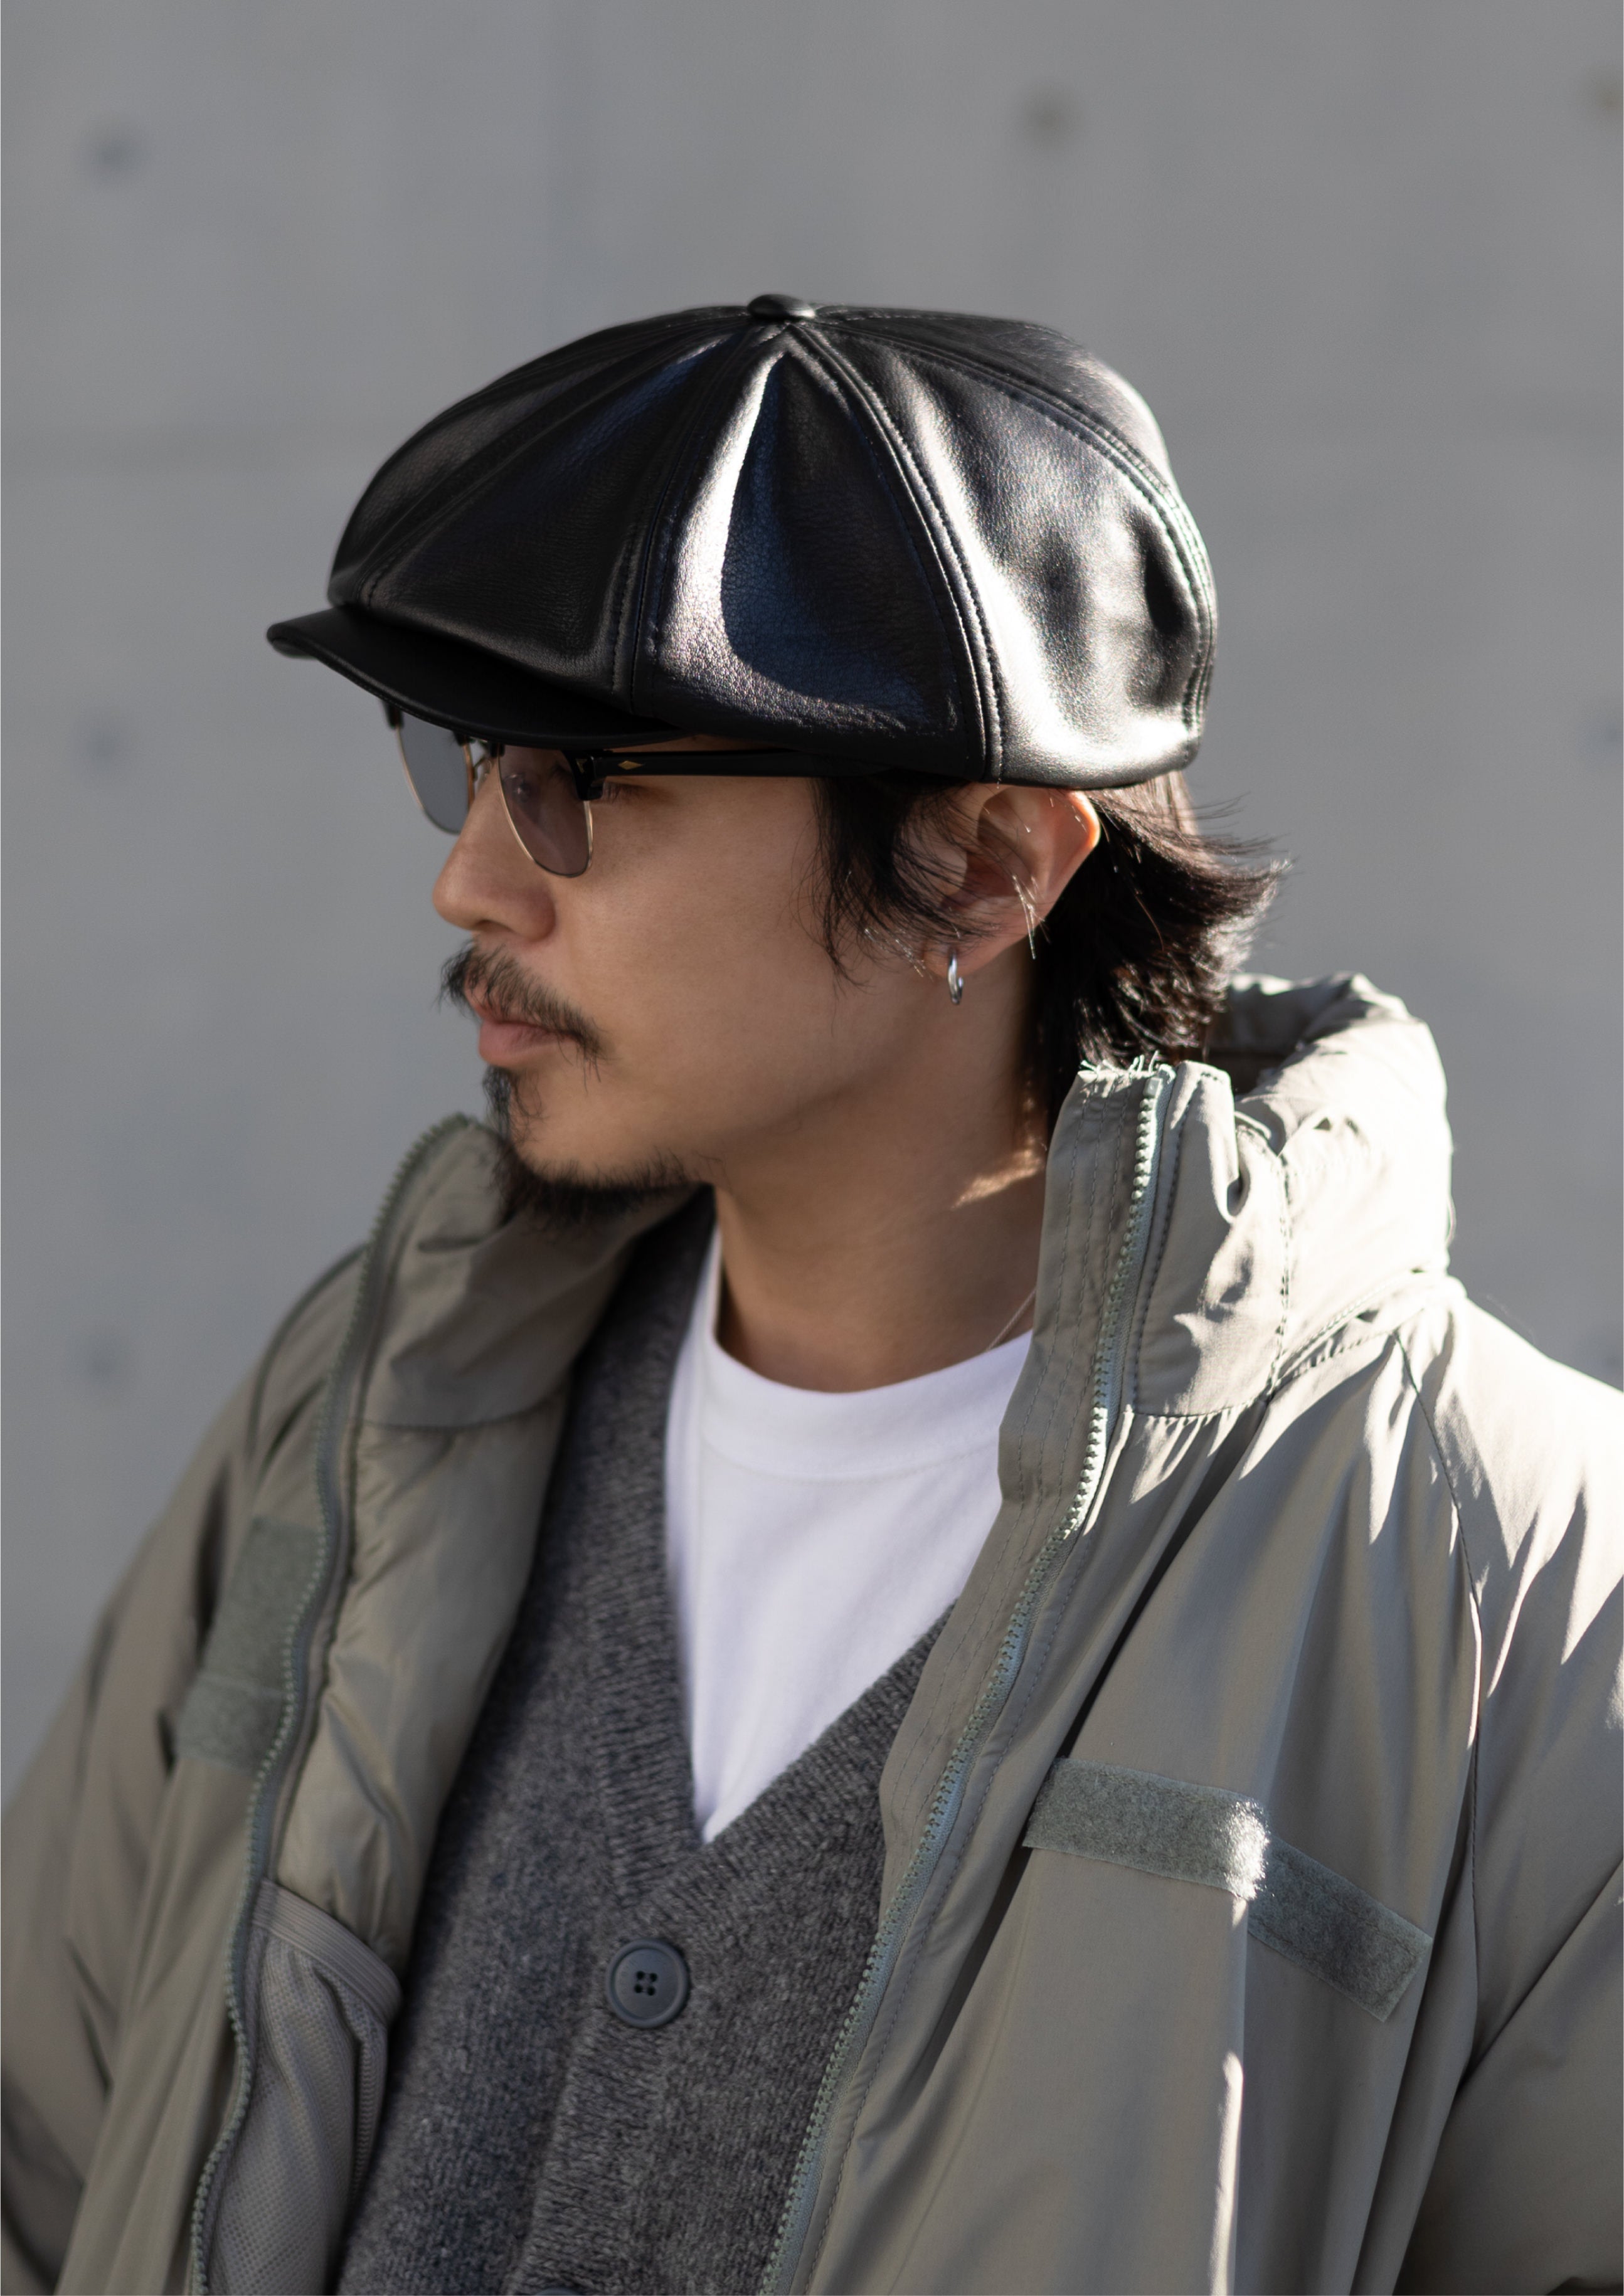 UNNAMED HEADWEAR 【LEATHER CASQUETTE】レザー キャスケット アン 